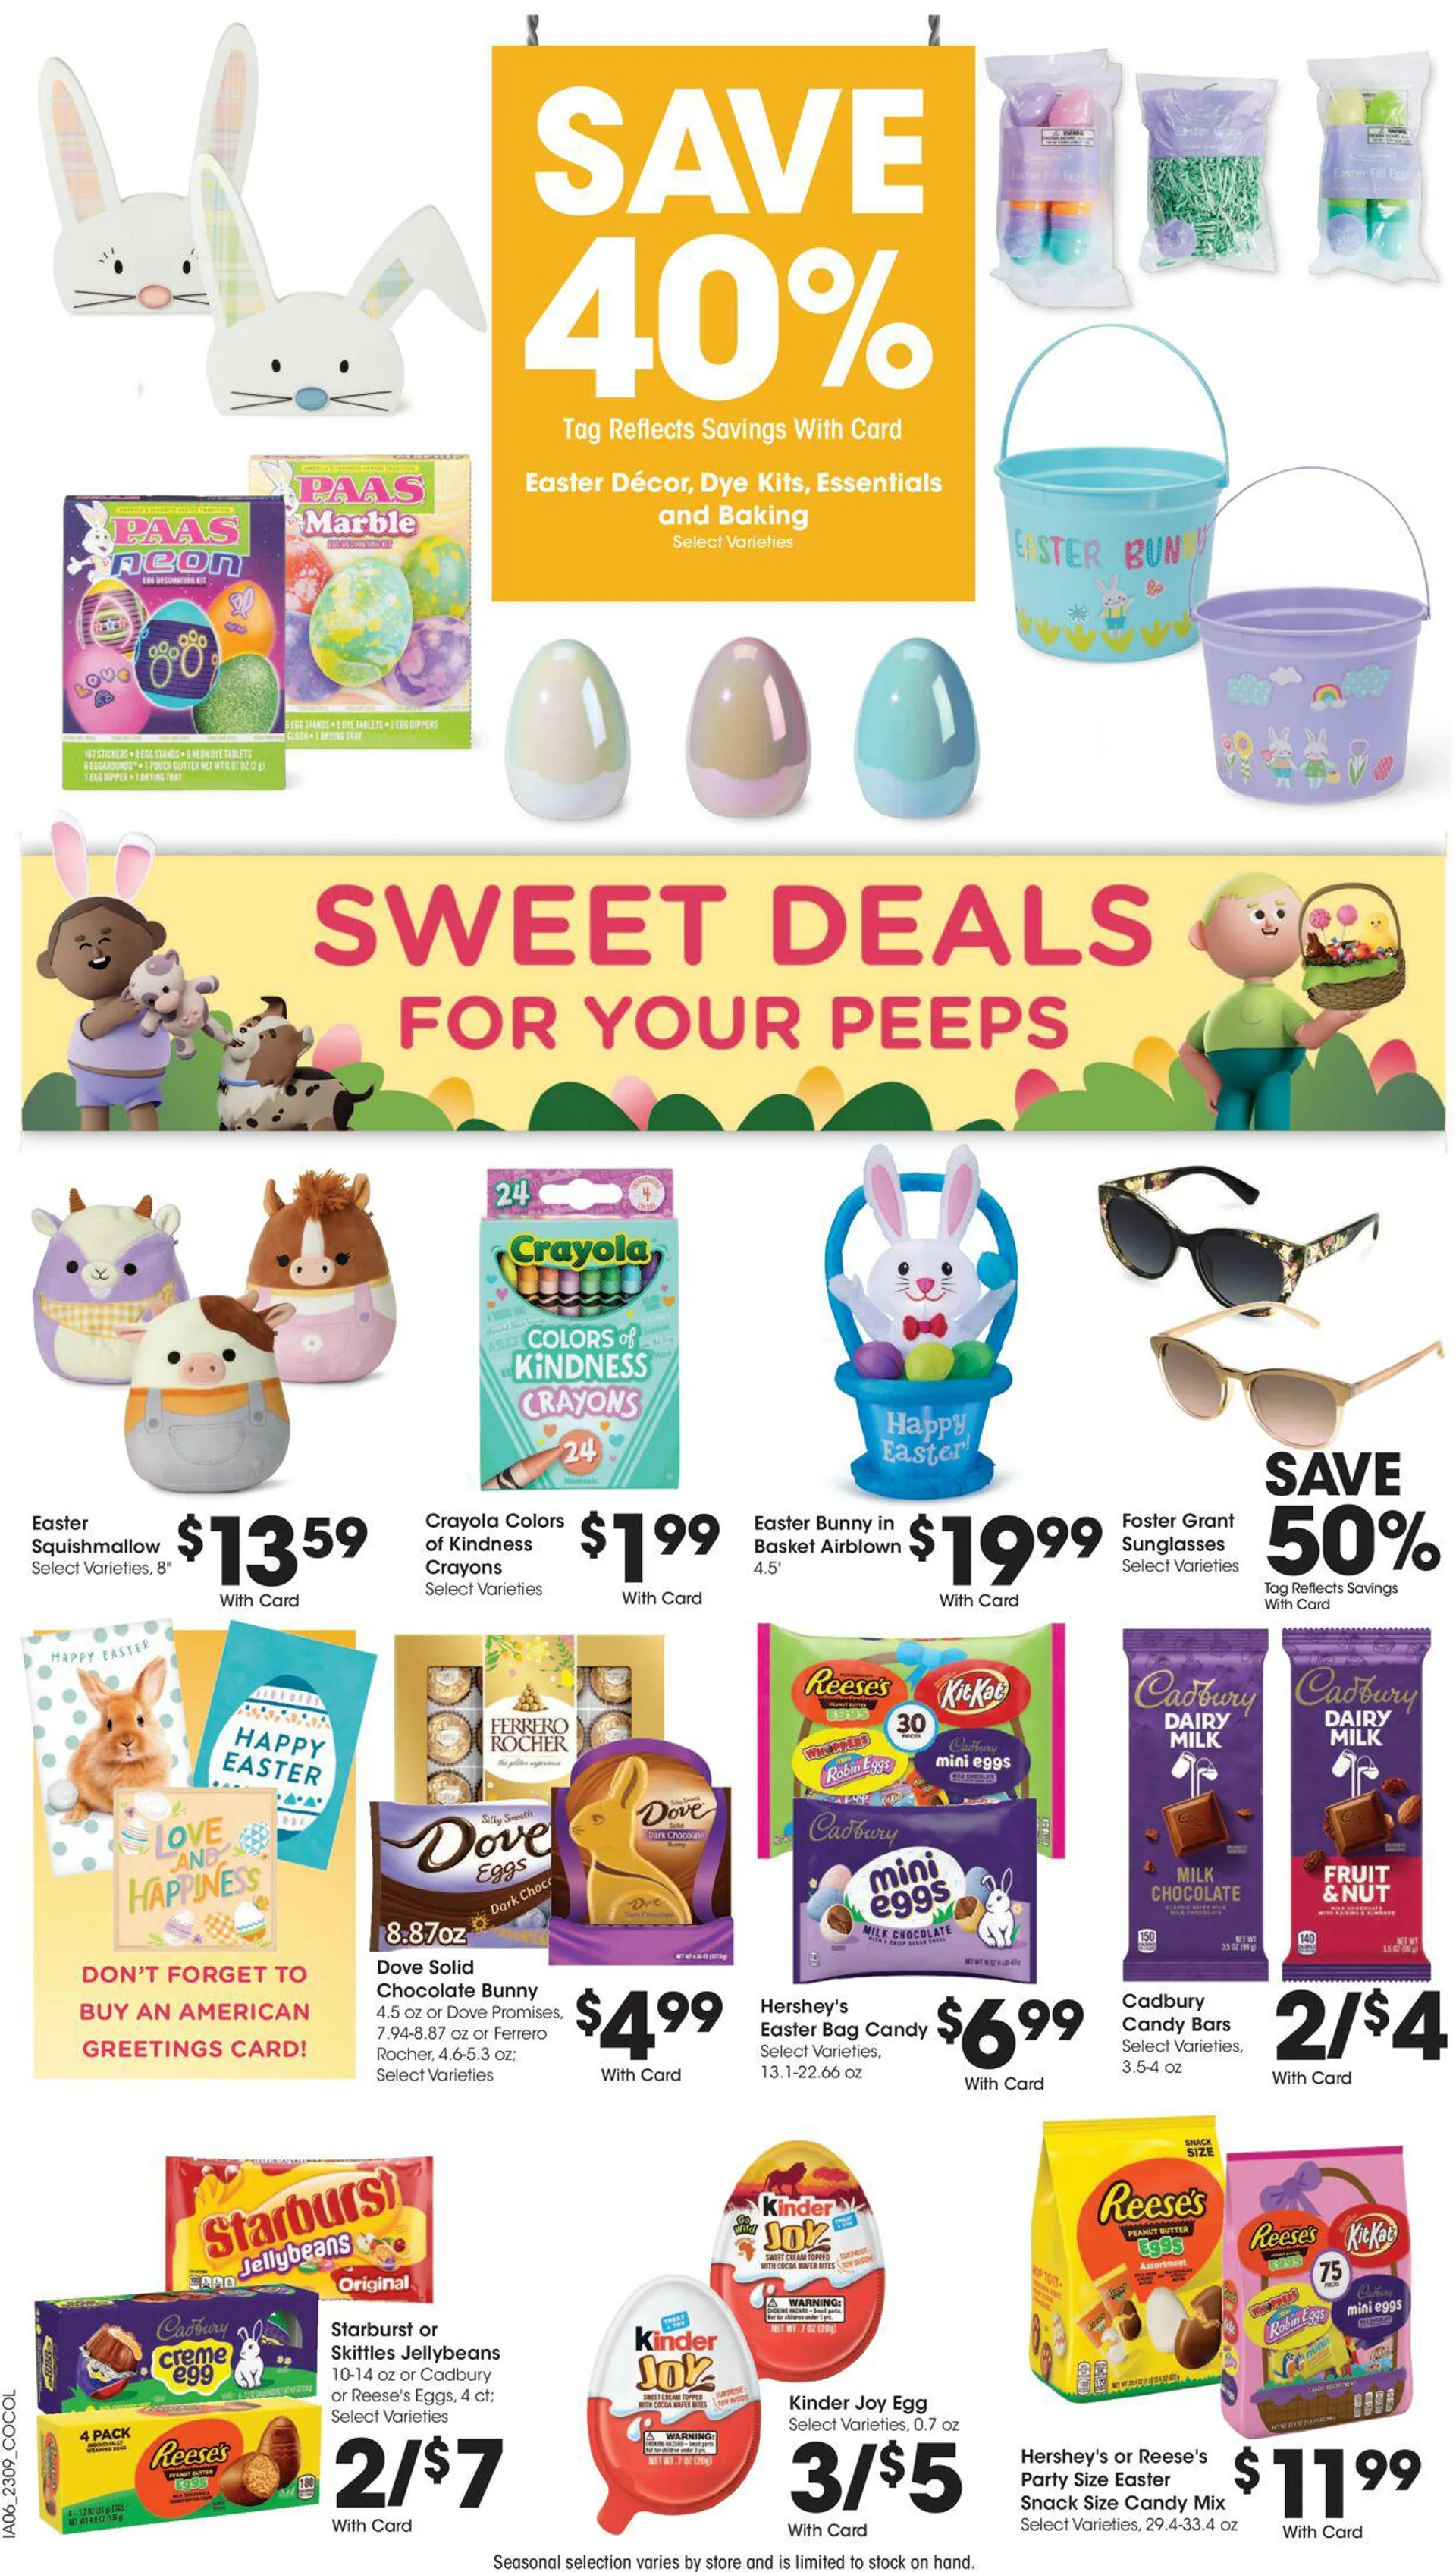 Kroger Current weekly ad - 12